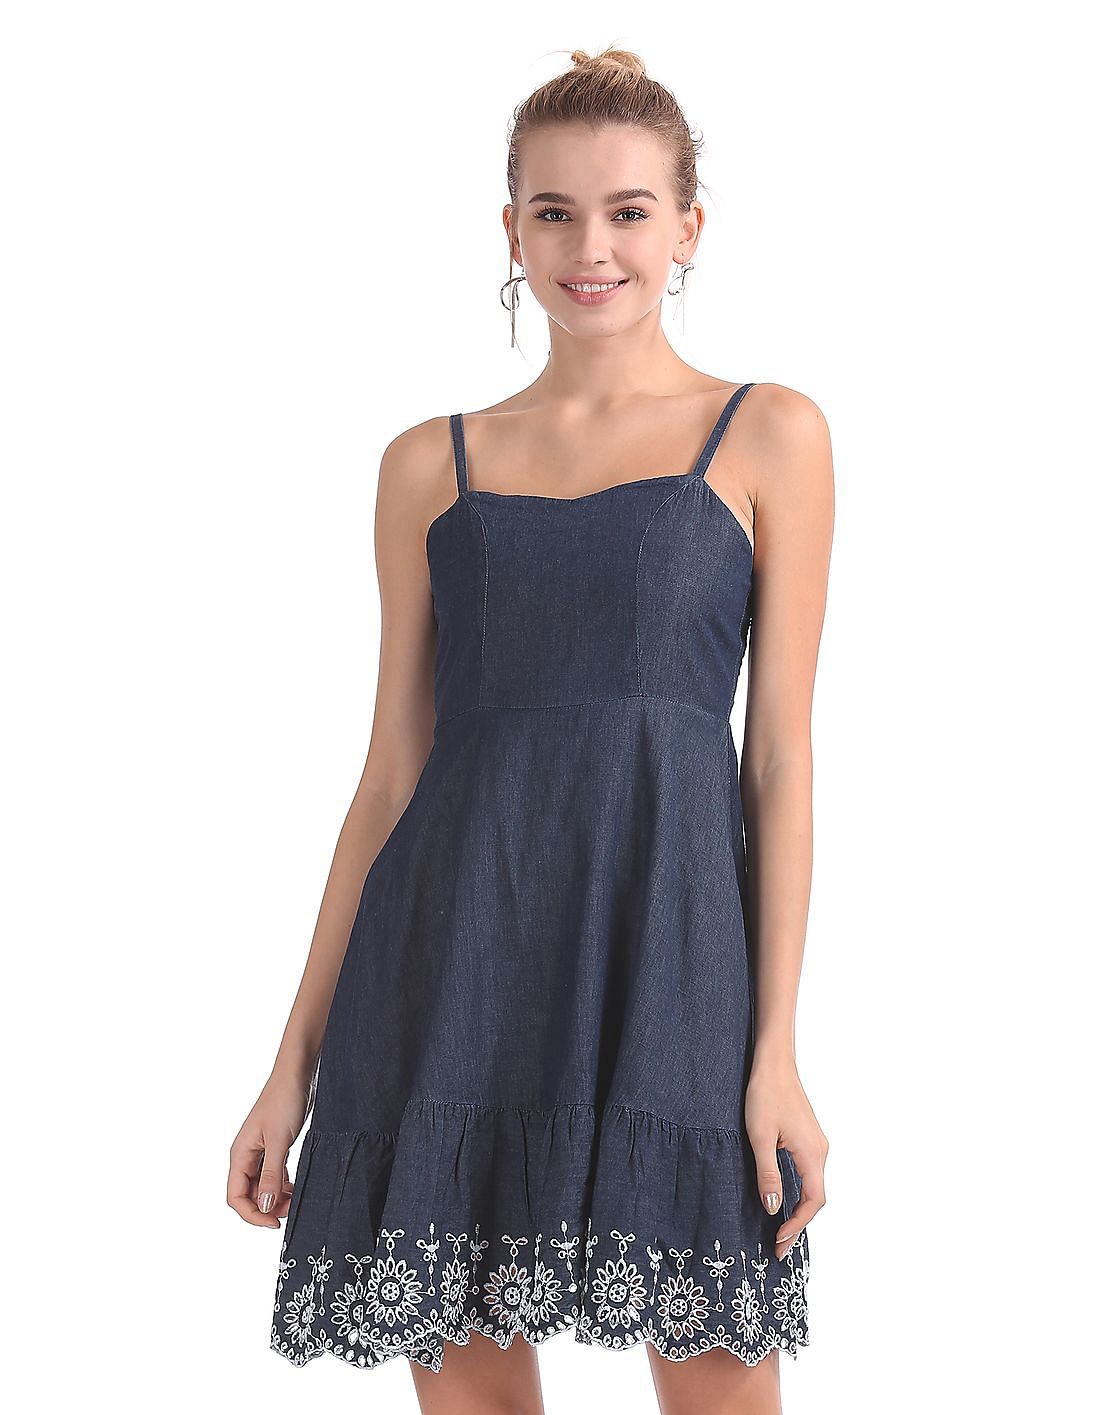 Buy Aeropostale Embroidered Chambray Fit And Flare Dress - NNNOW.com